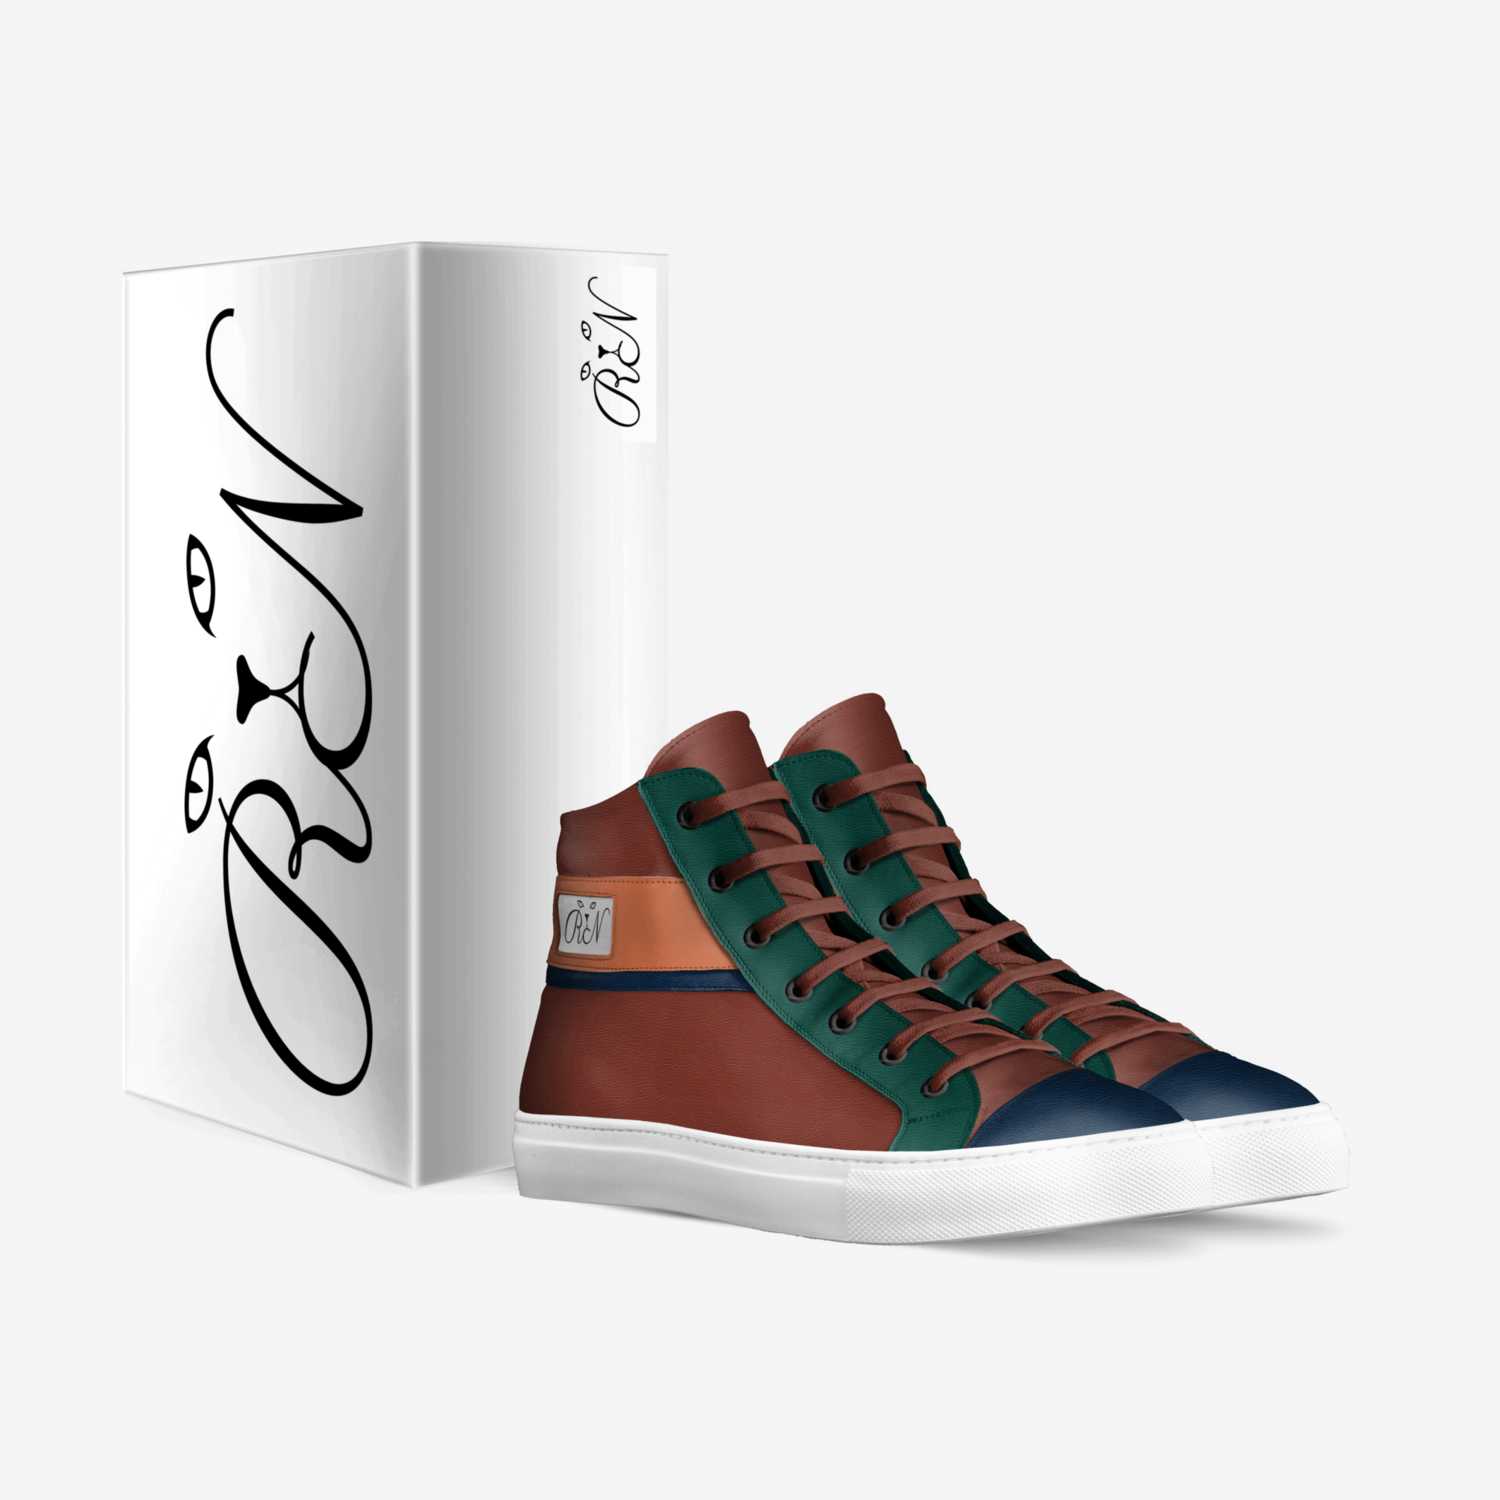 RN custom made in Italy shoes by Rawana | Box view